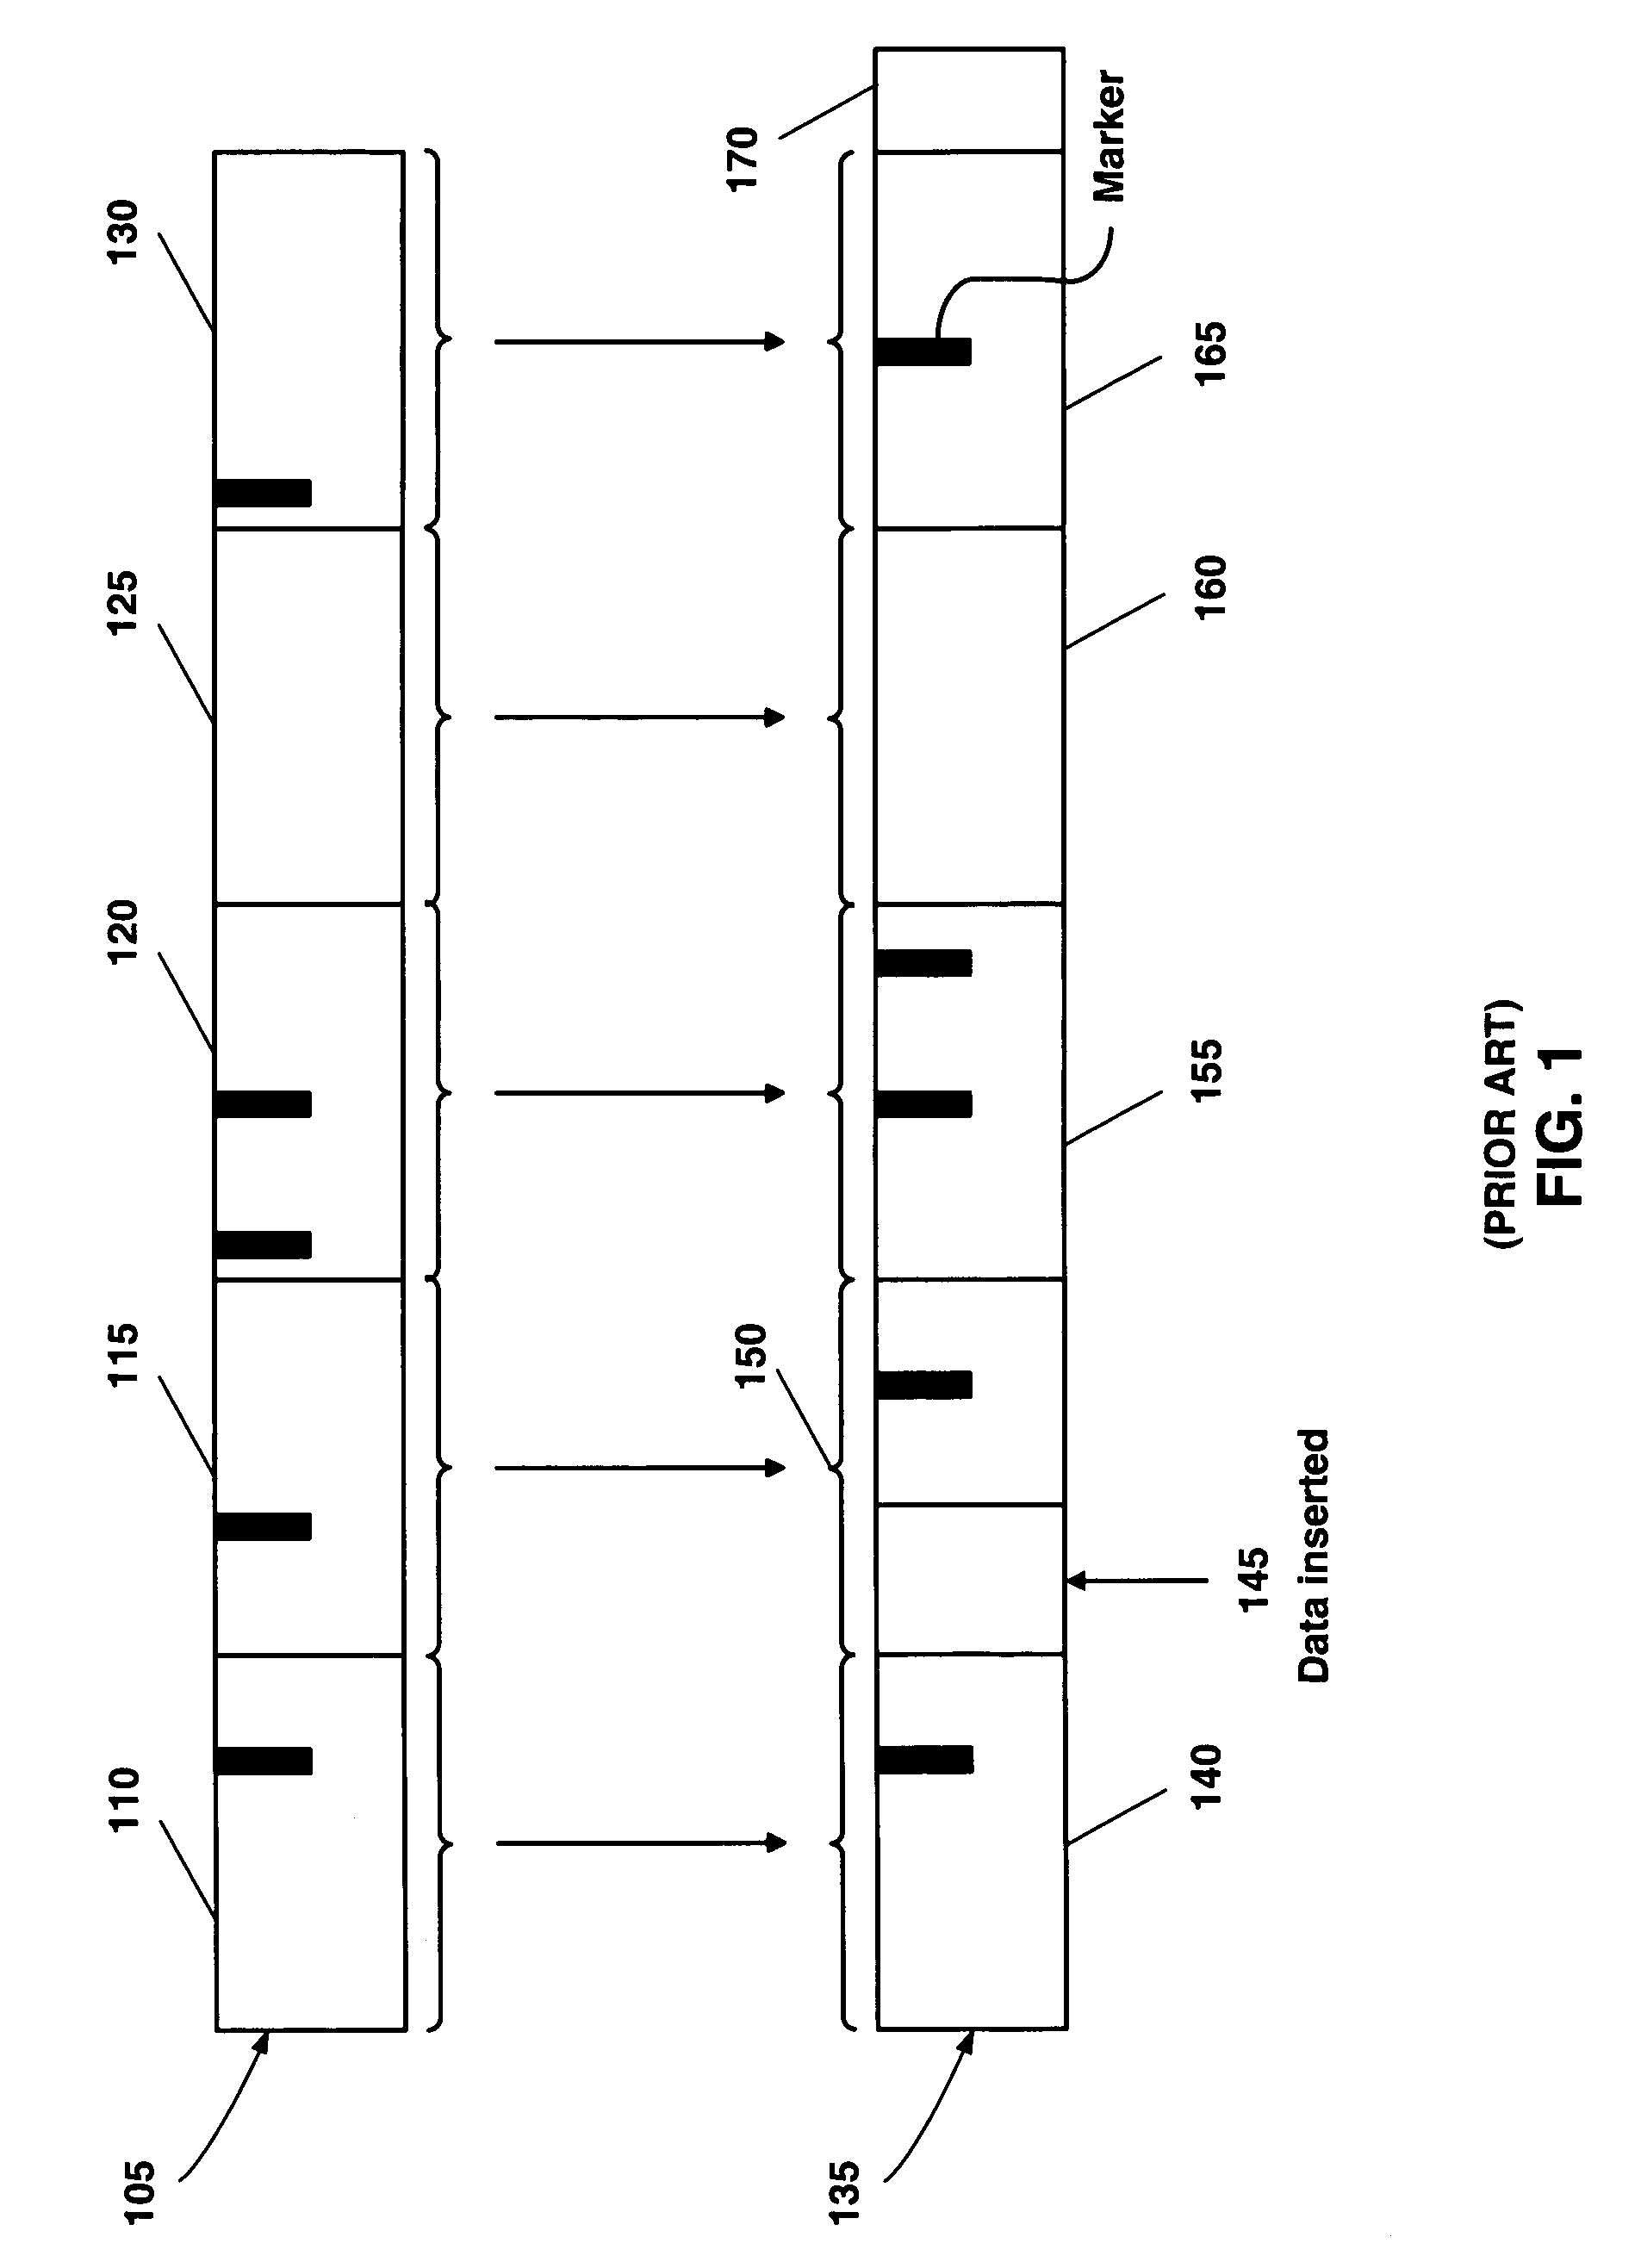 System and method for dividing data into predominantly fixed-sized chunks so that duplicate data chunks may be identified